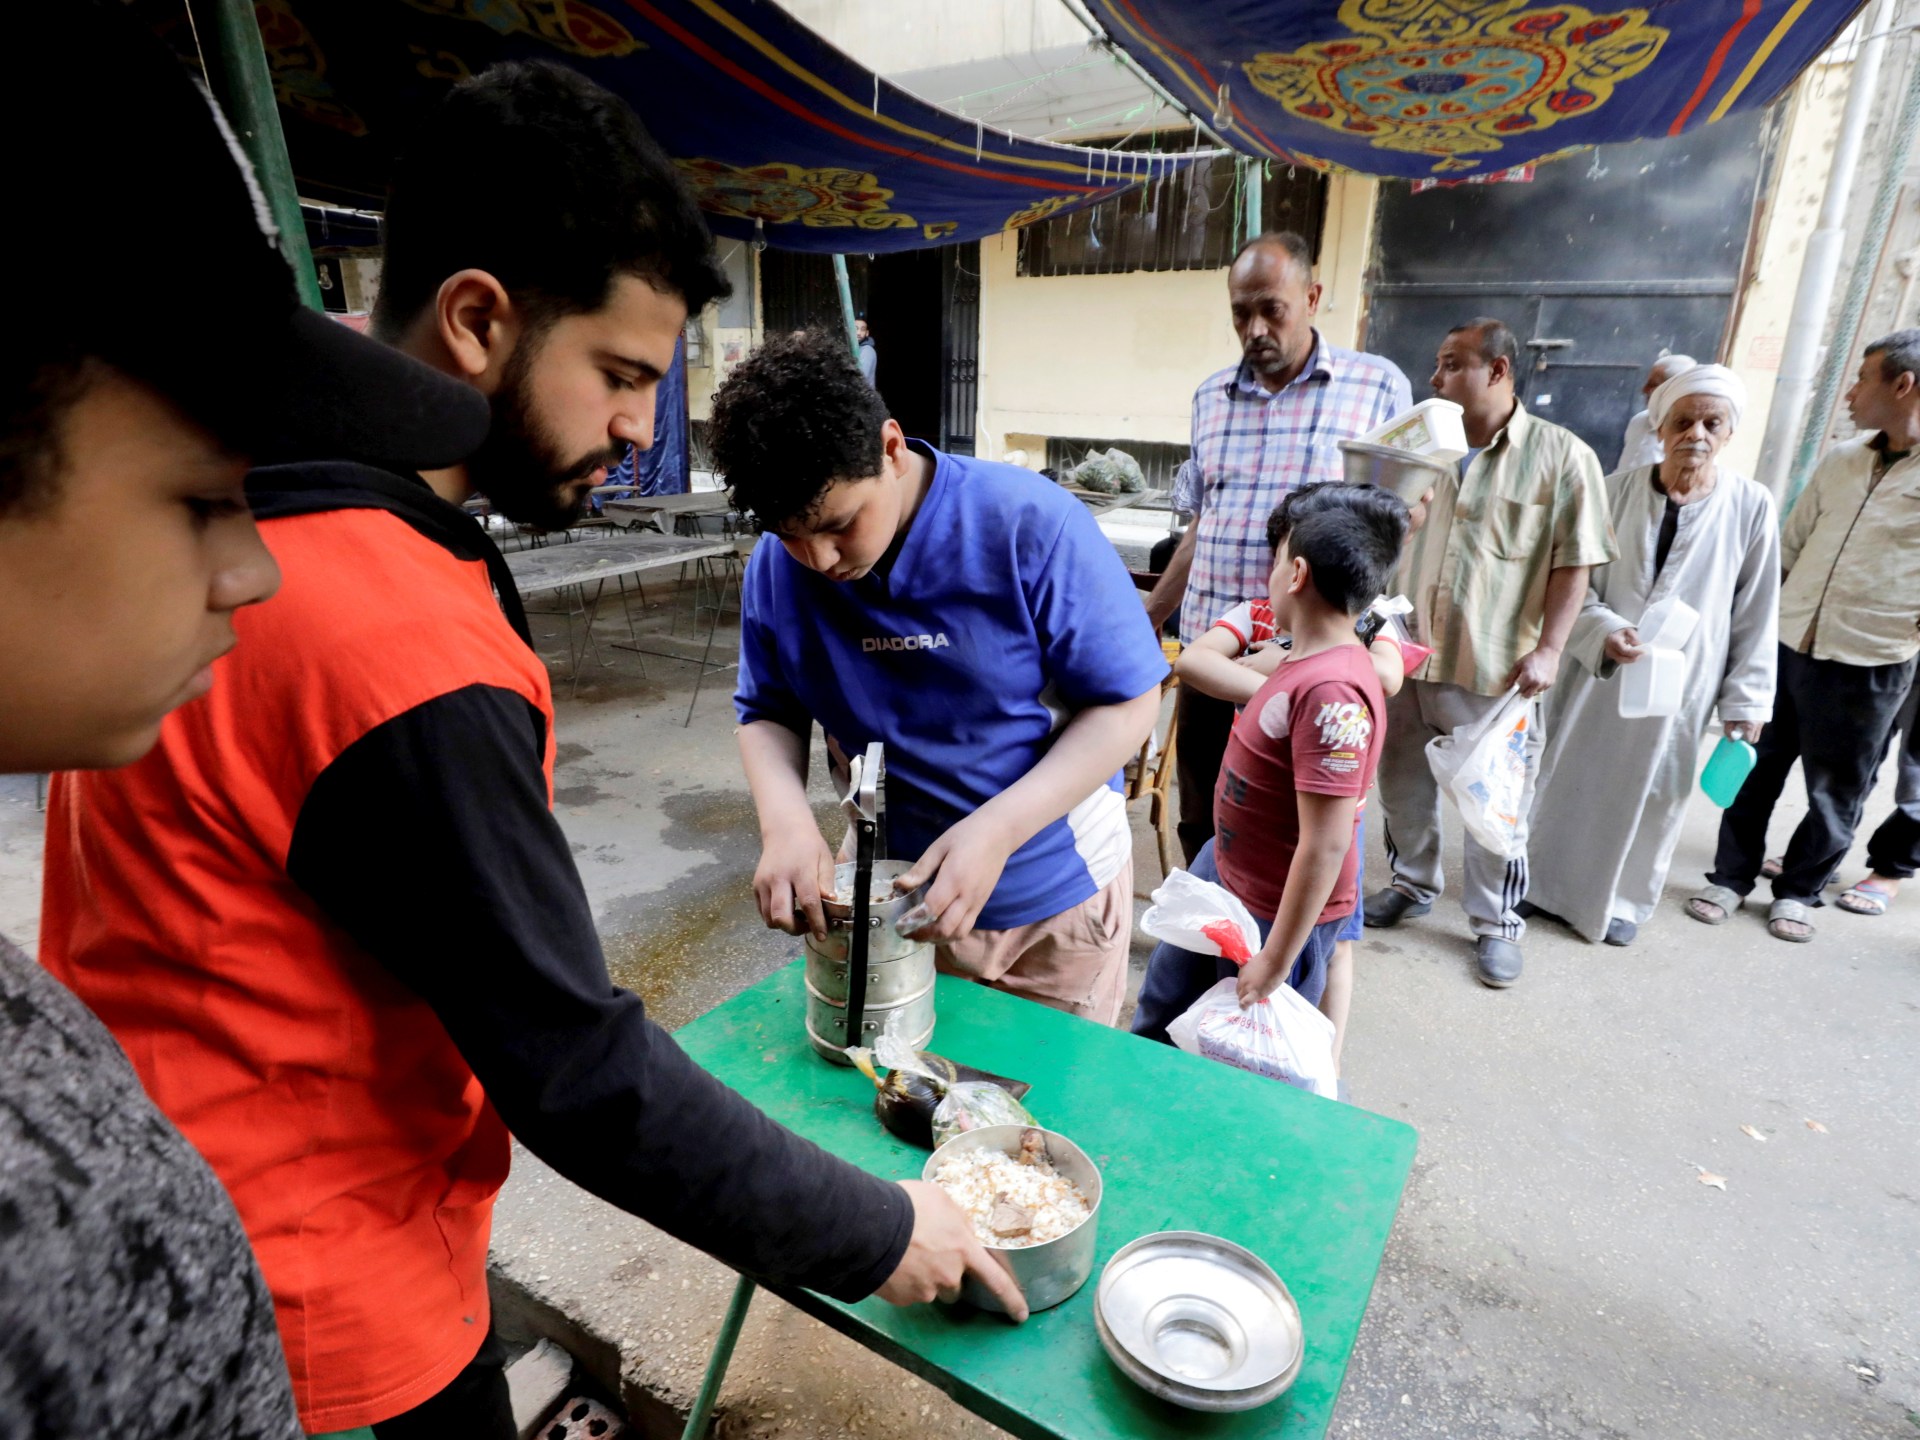 Despite inflation, Egyptians dig deep to give charity in Ramadan